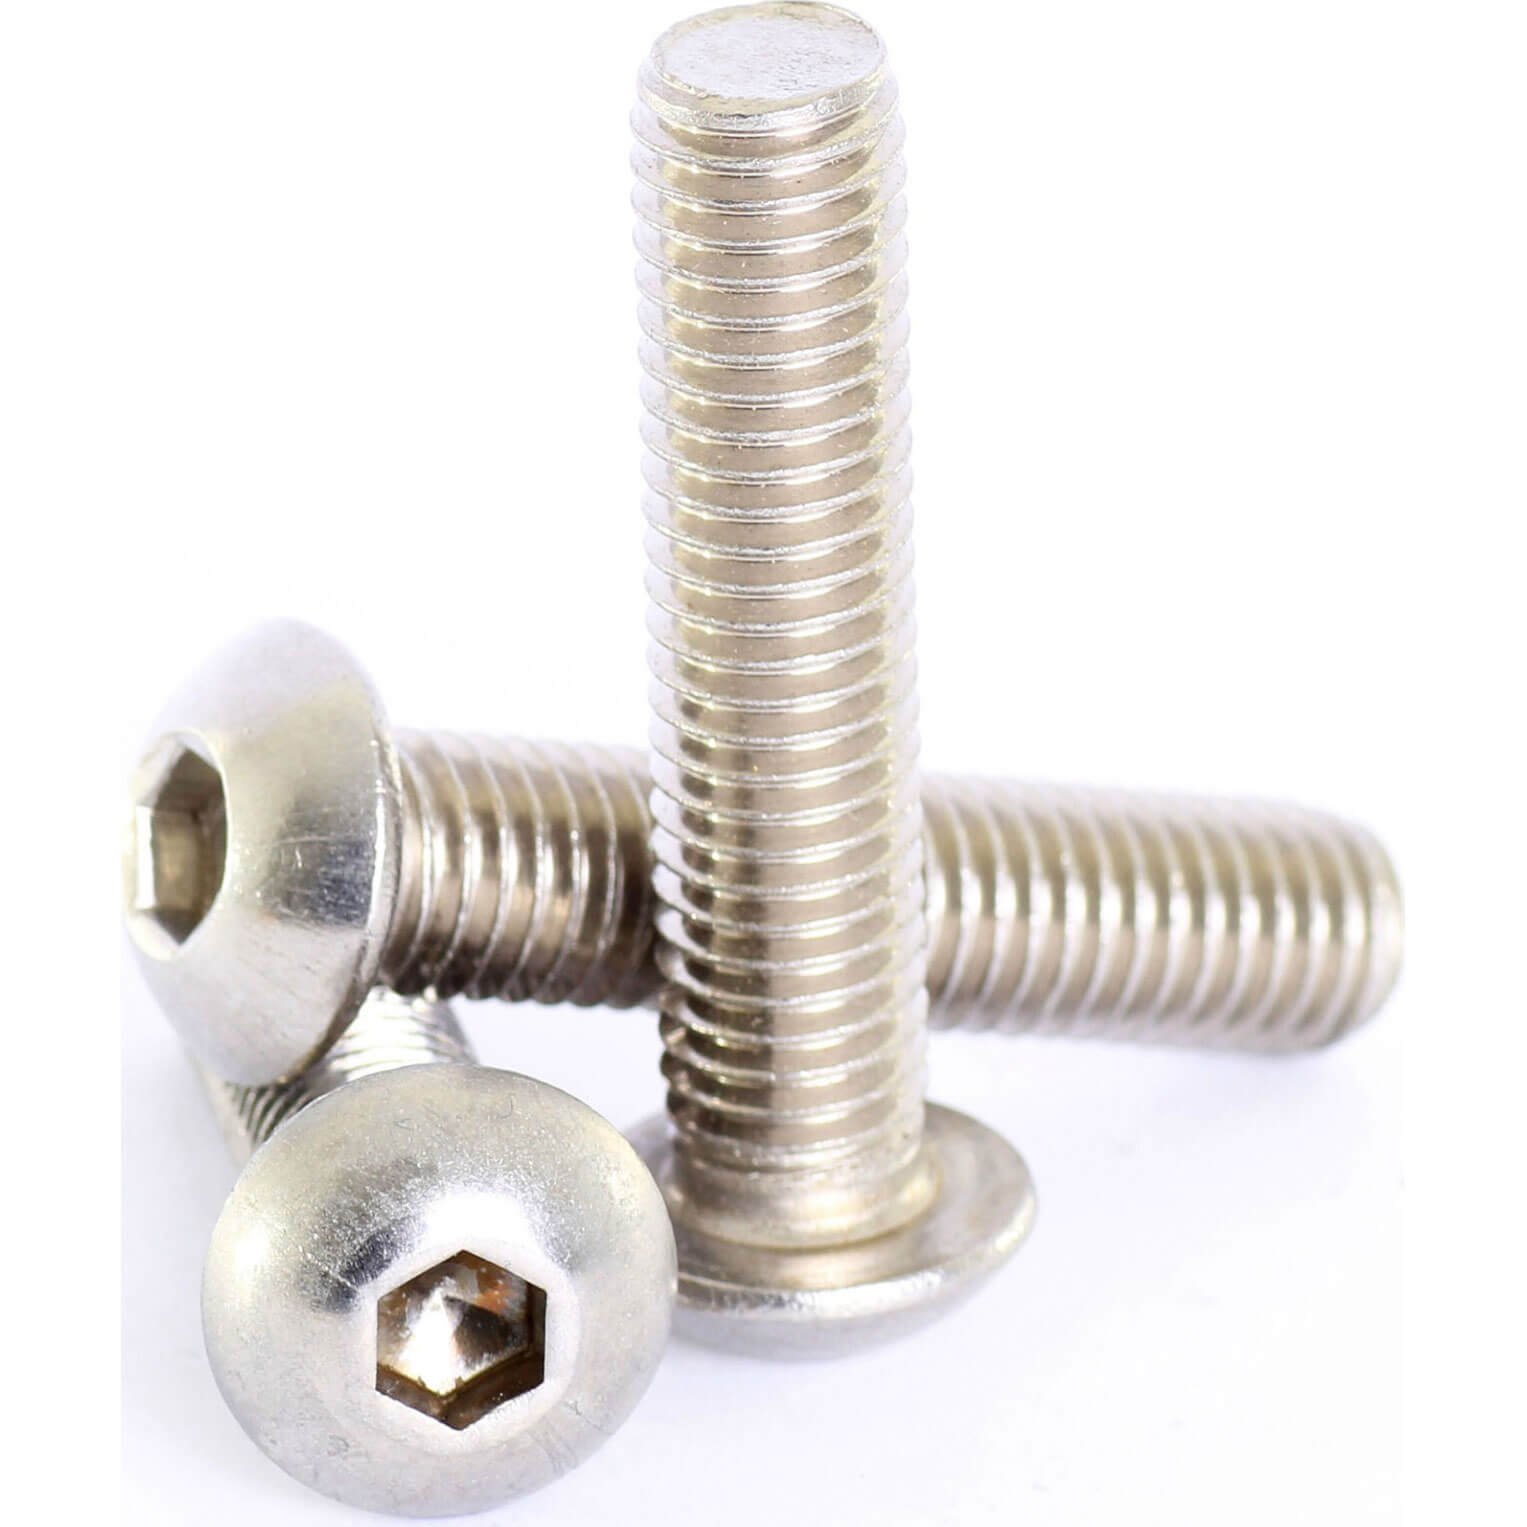 Image of Sirius Button Head Socket Screws A2 304 Stainless Steel M3 8mm Pack of 1